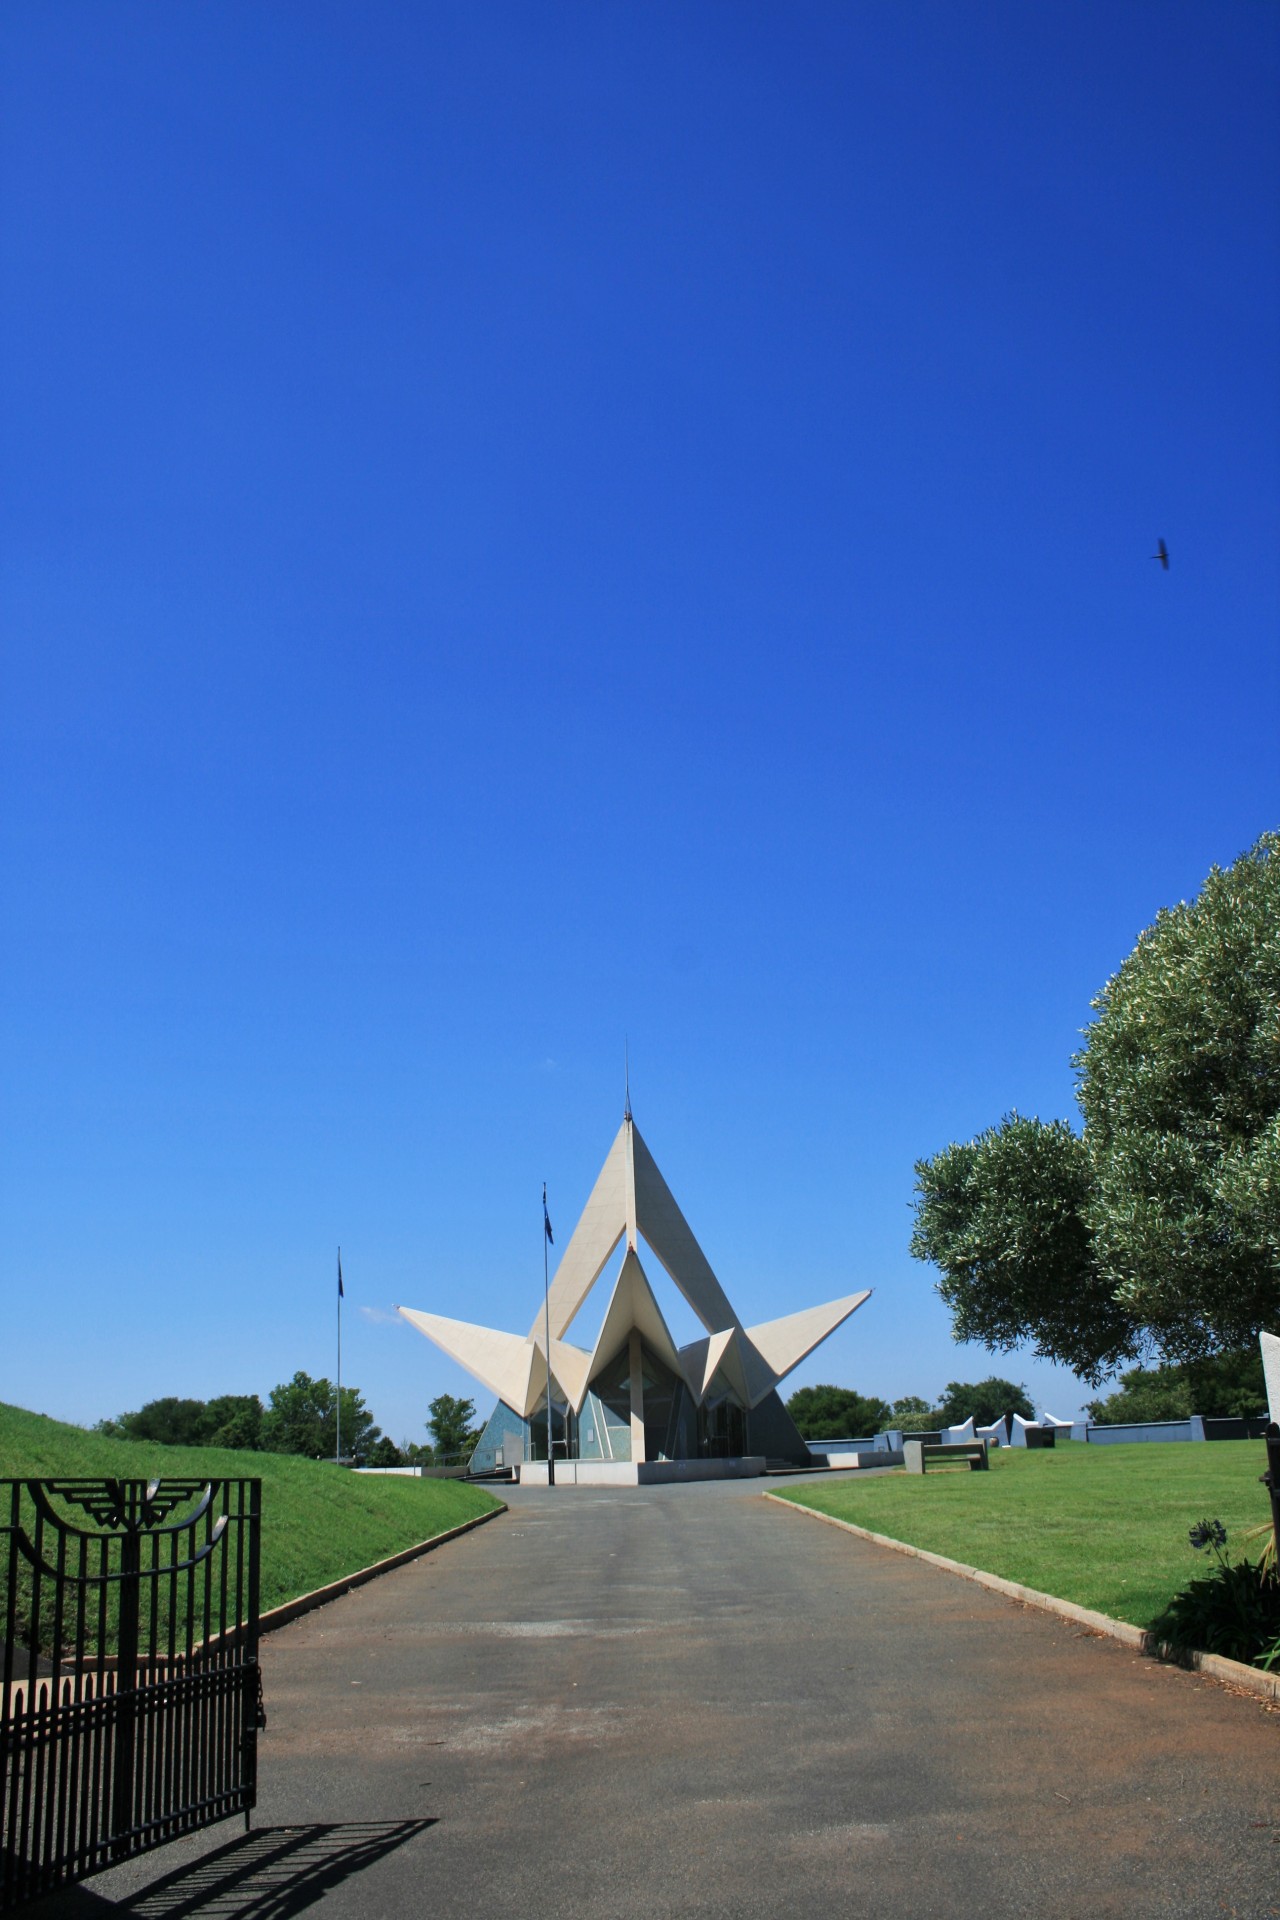 south african air force memorial monument star design free photo